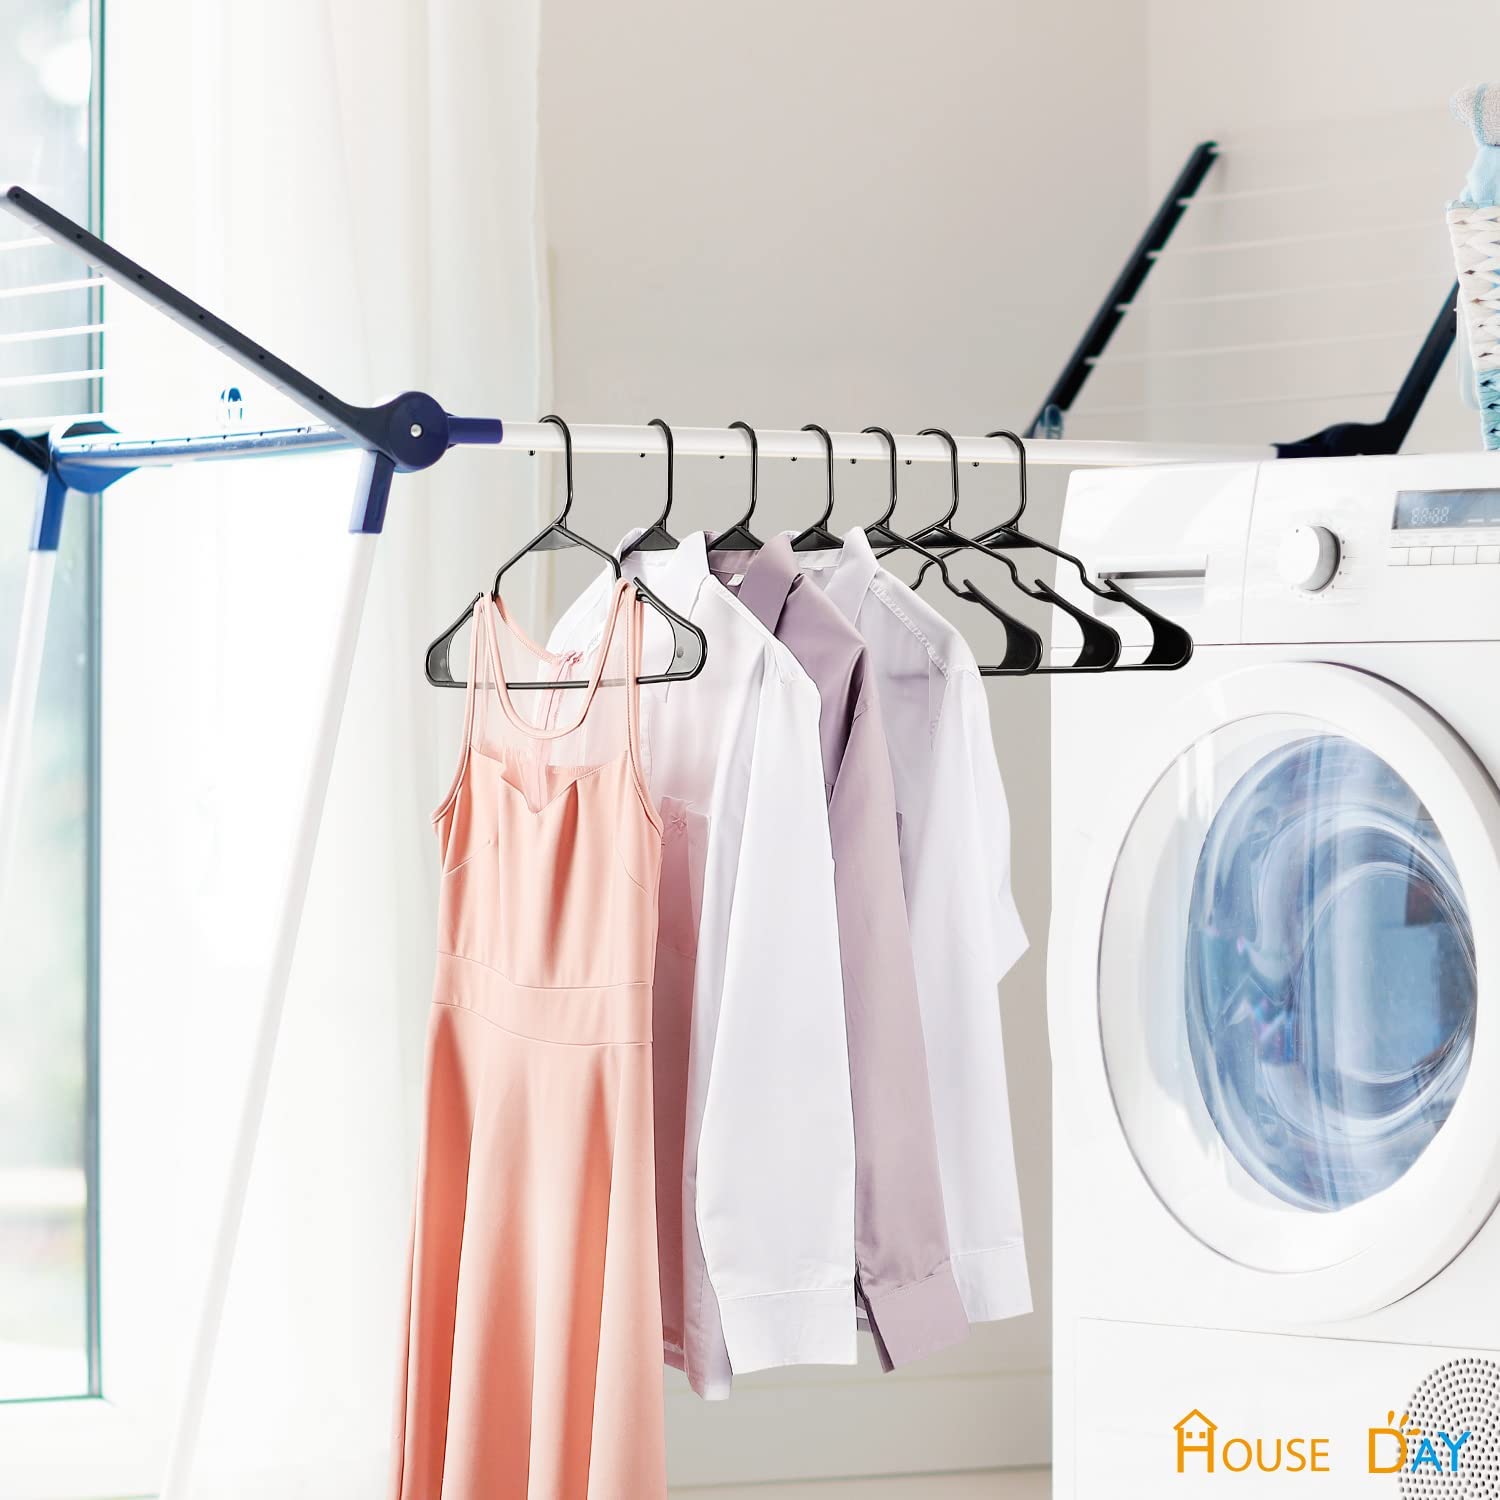 HOUSE DAY Black Plastic Adult Hangers 16.5 24-Pack: Light-Weight,  Space-Saving, Heavy-Duty for Laundry & Everyday Use